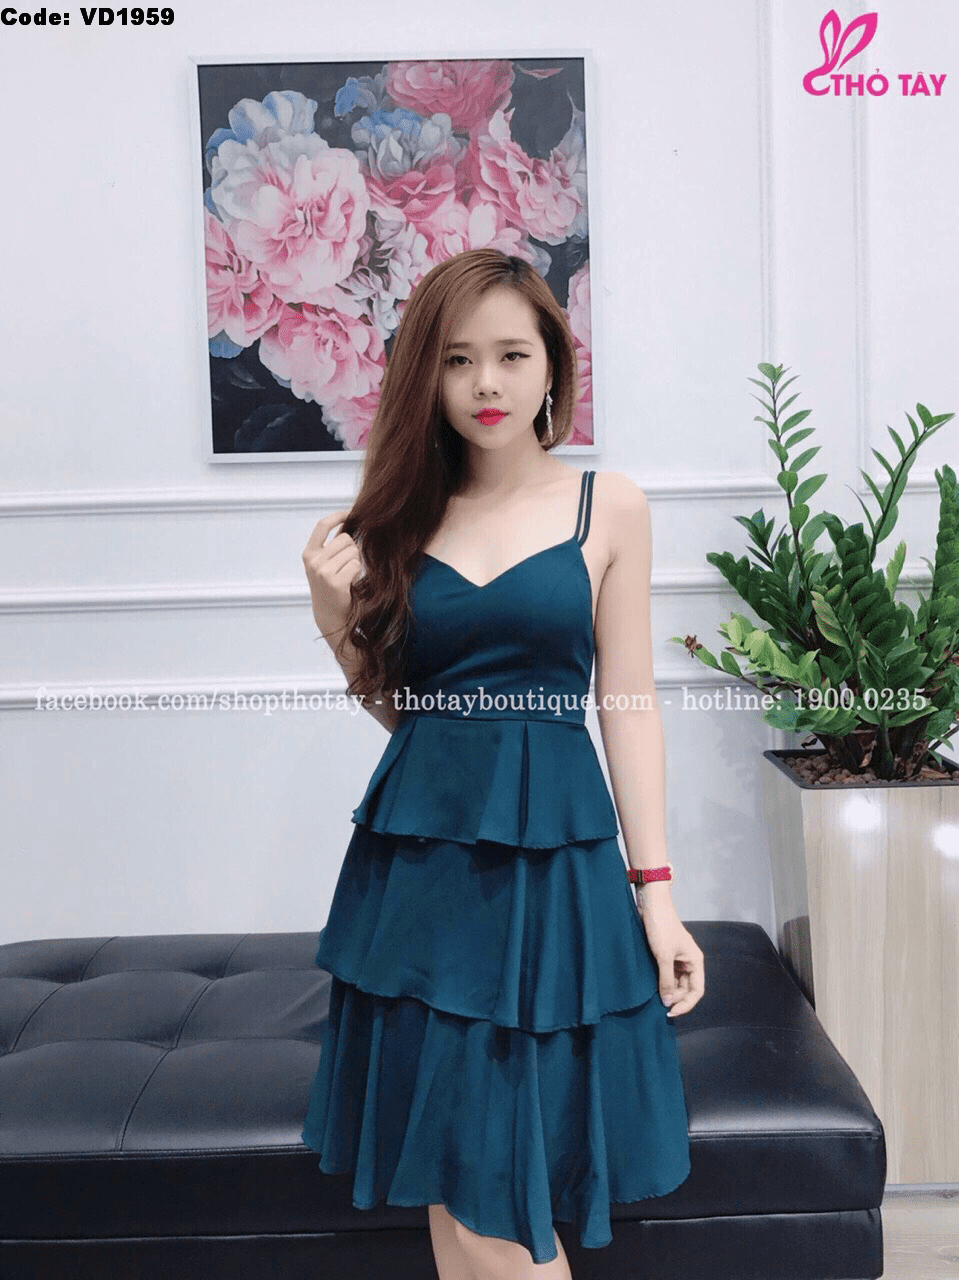 Có những màu sắc nào cho đầm voan tầng 2 dây? (What are the available colors for a layered chiffon dress with straps?)